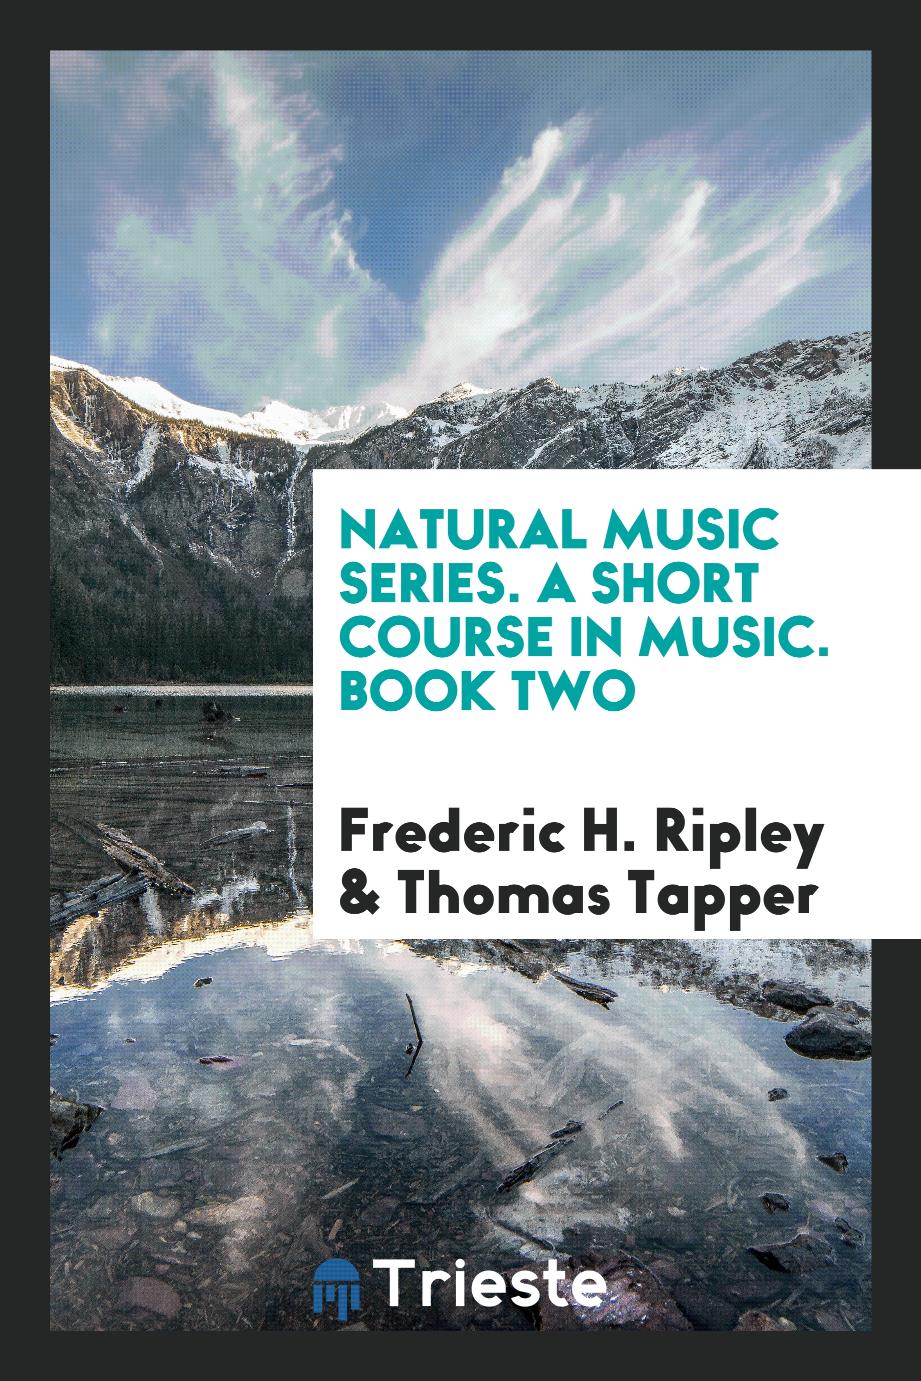 Natural Music Series. A Short Course in Music. Book Two